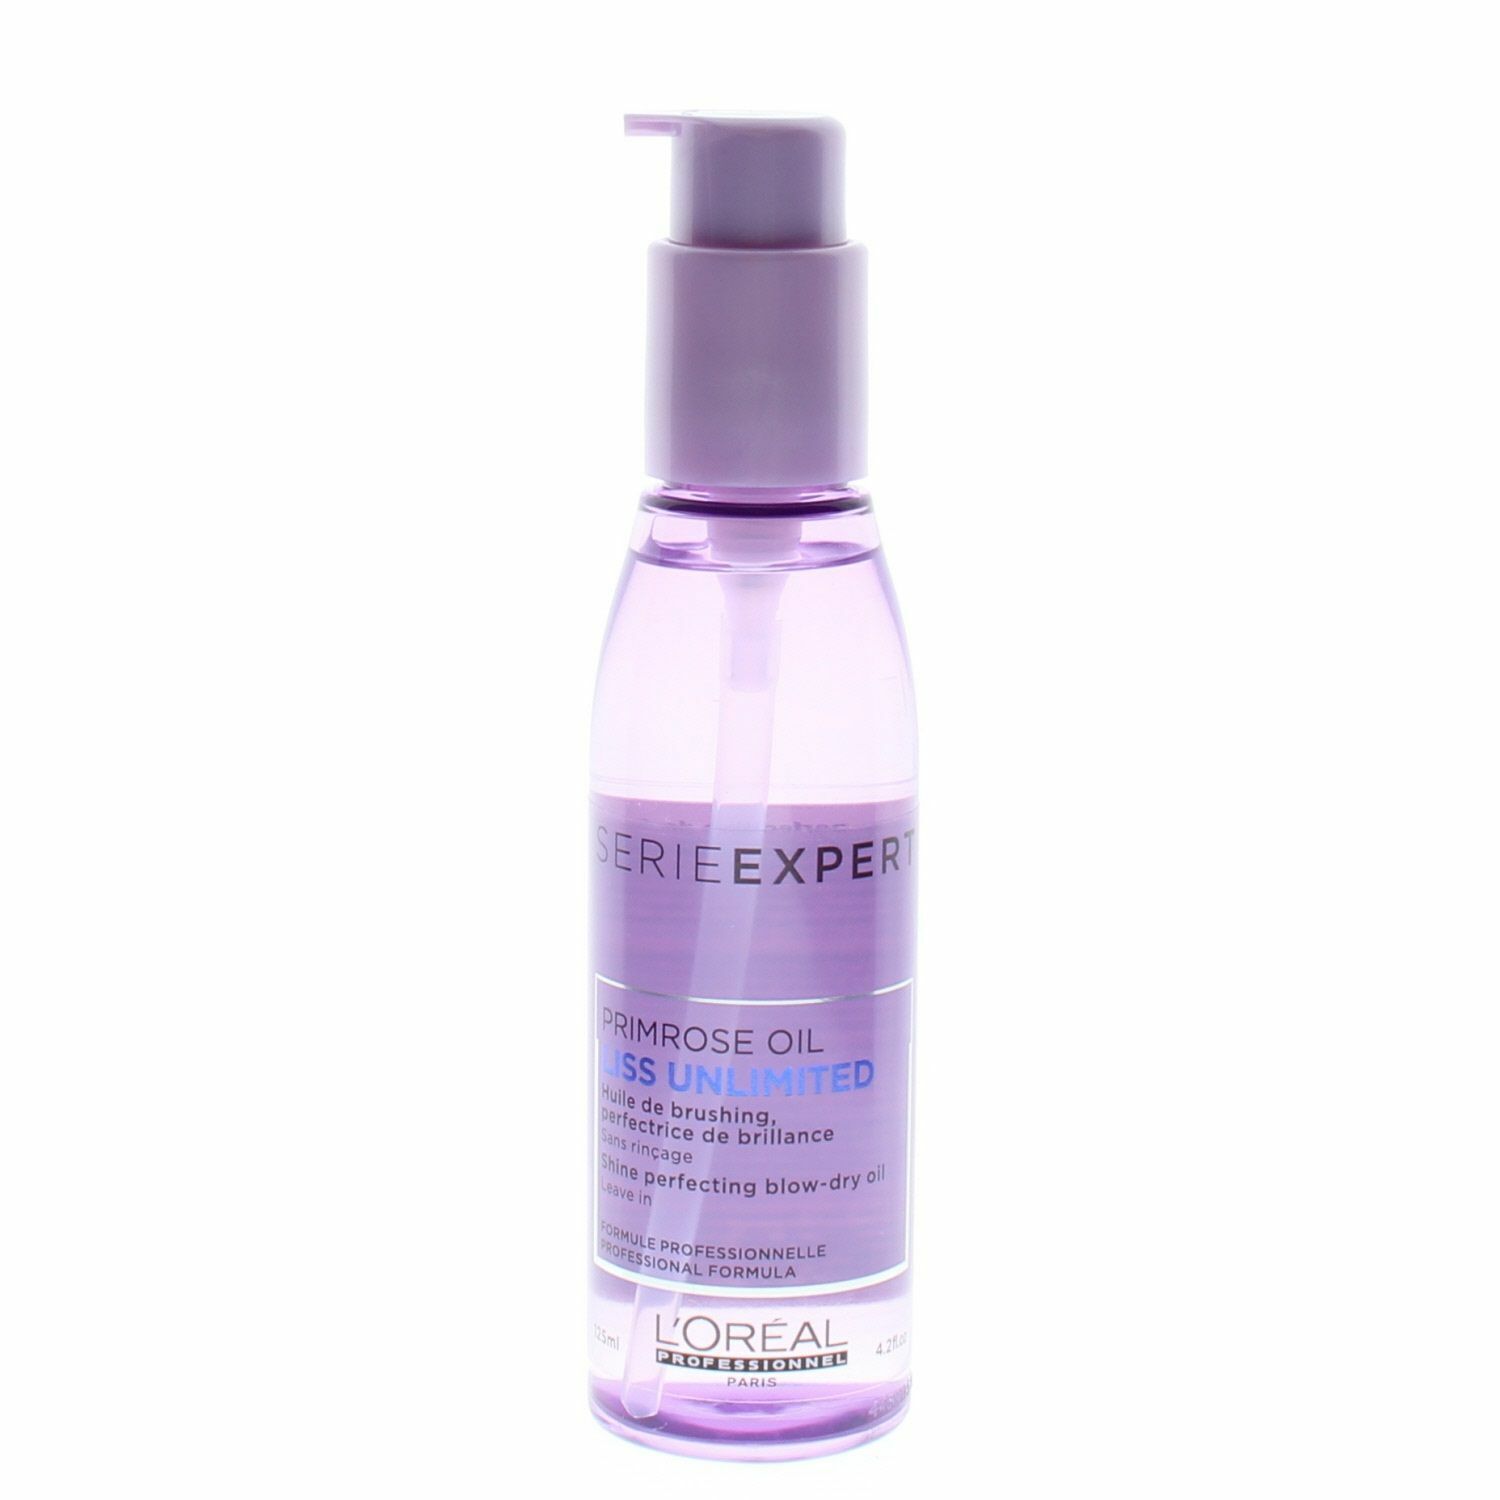 Loreal Serie Expert Primrose Liss Unlimited Shine Perfecting BlowDry Oil 4.22Oz